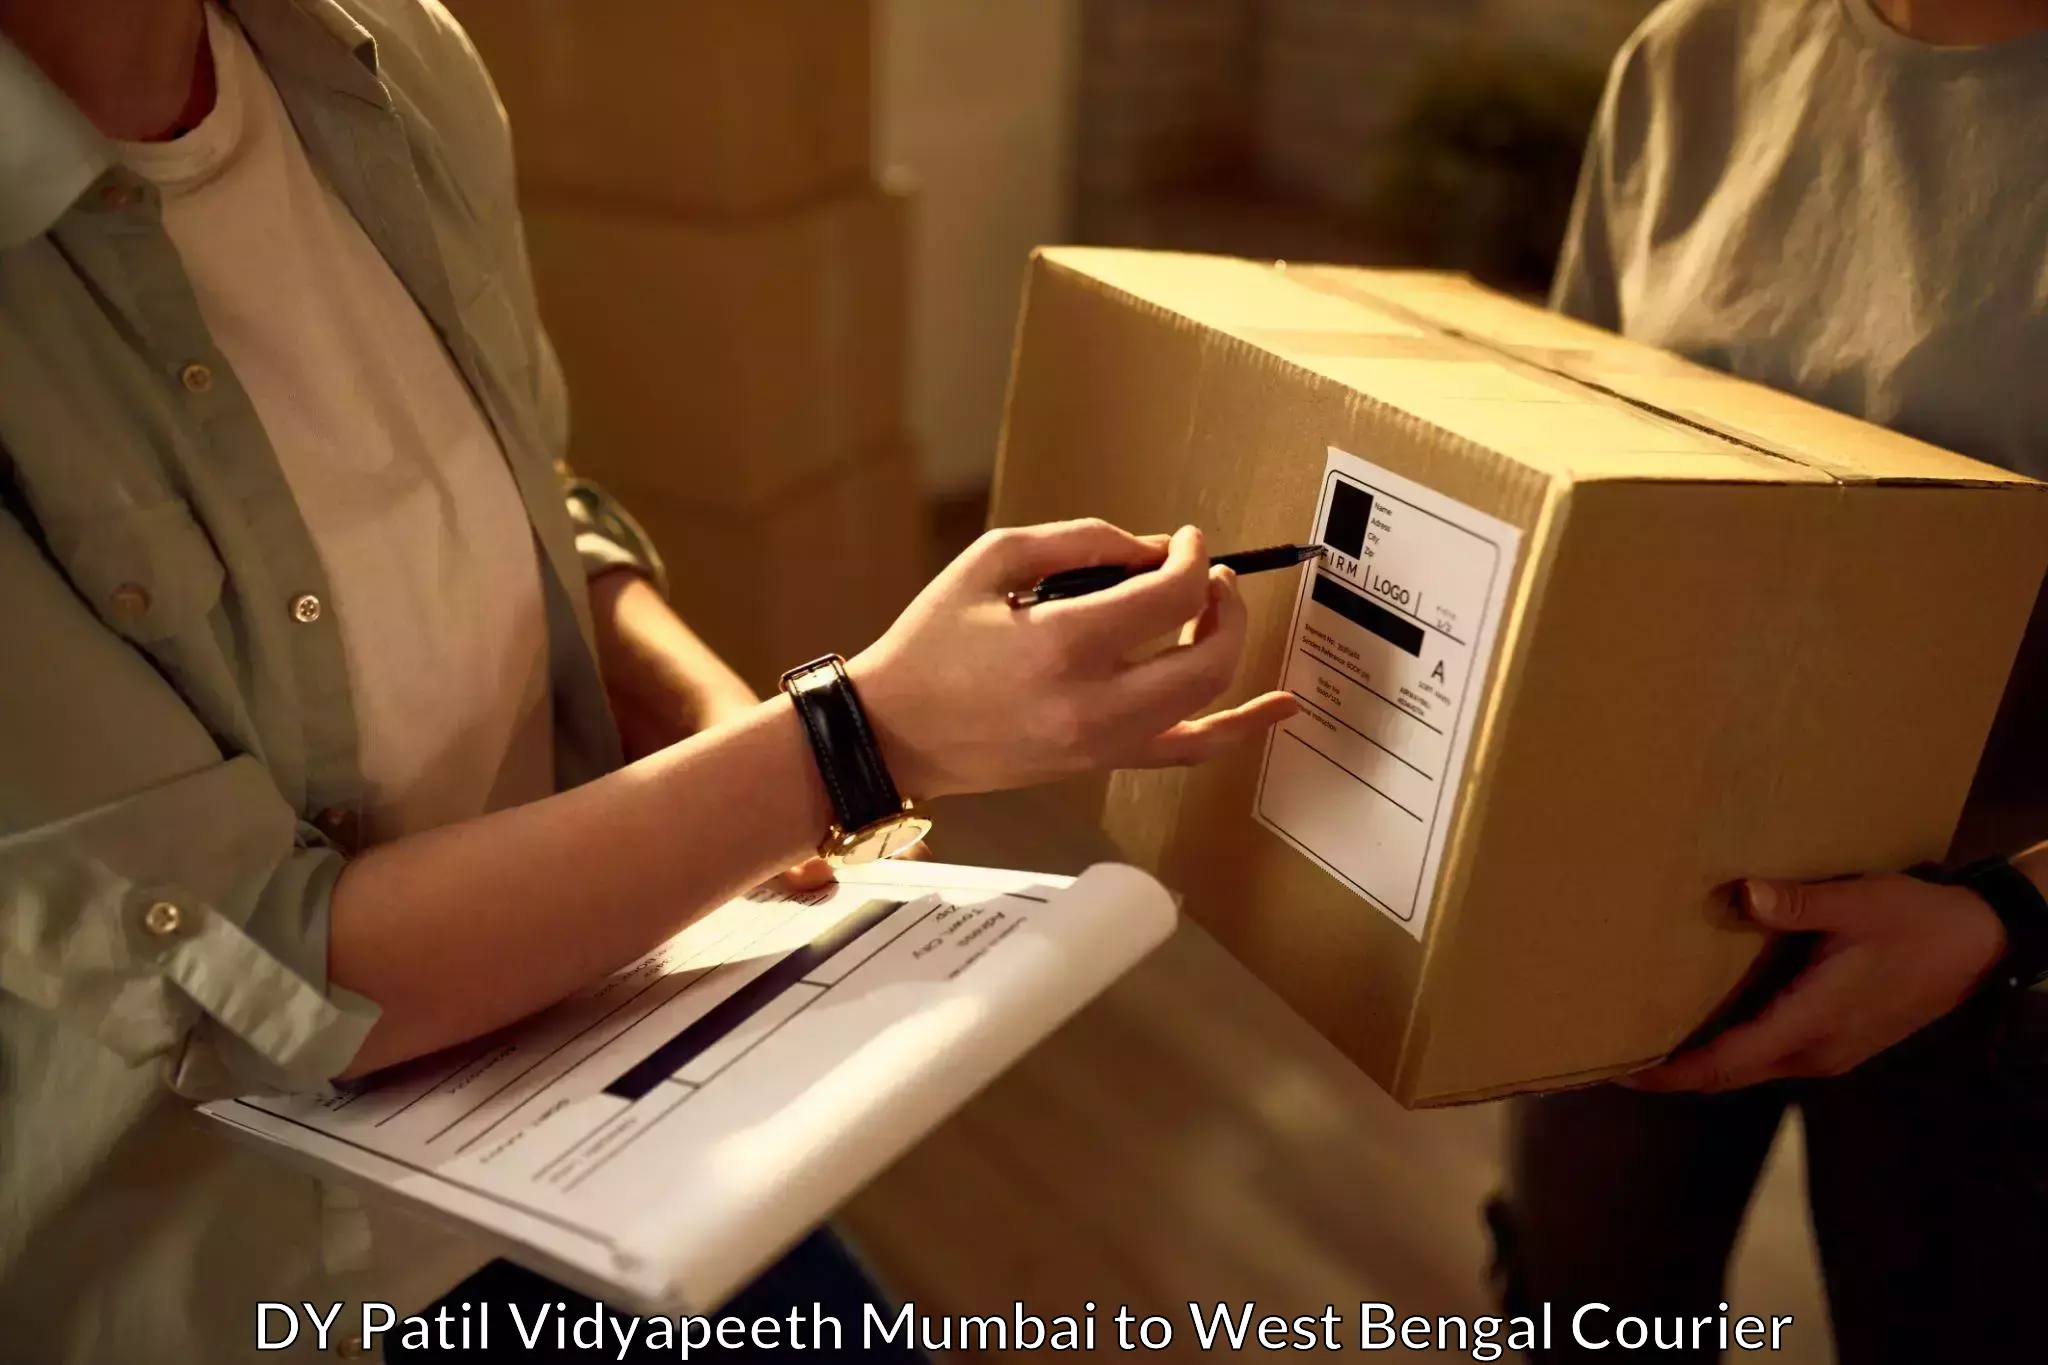 Professional courier handling DY Patil Vidyapeeth Mumbai to West Bengal